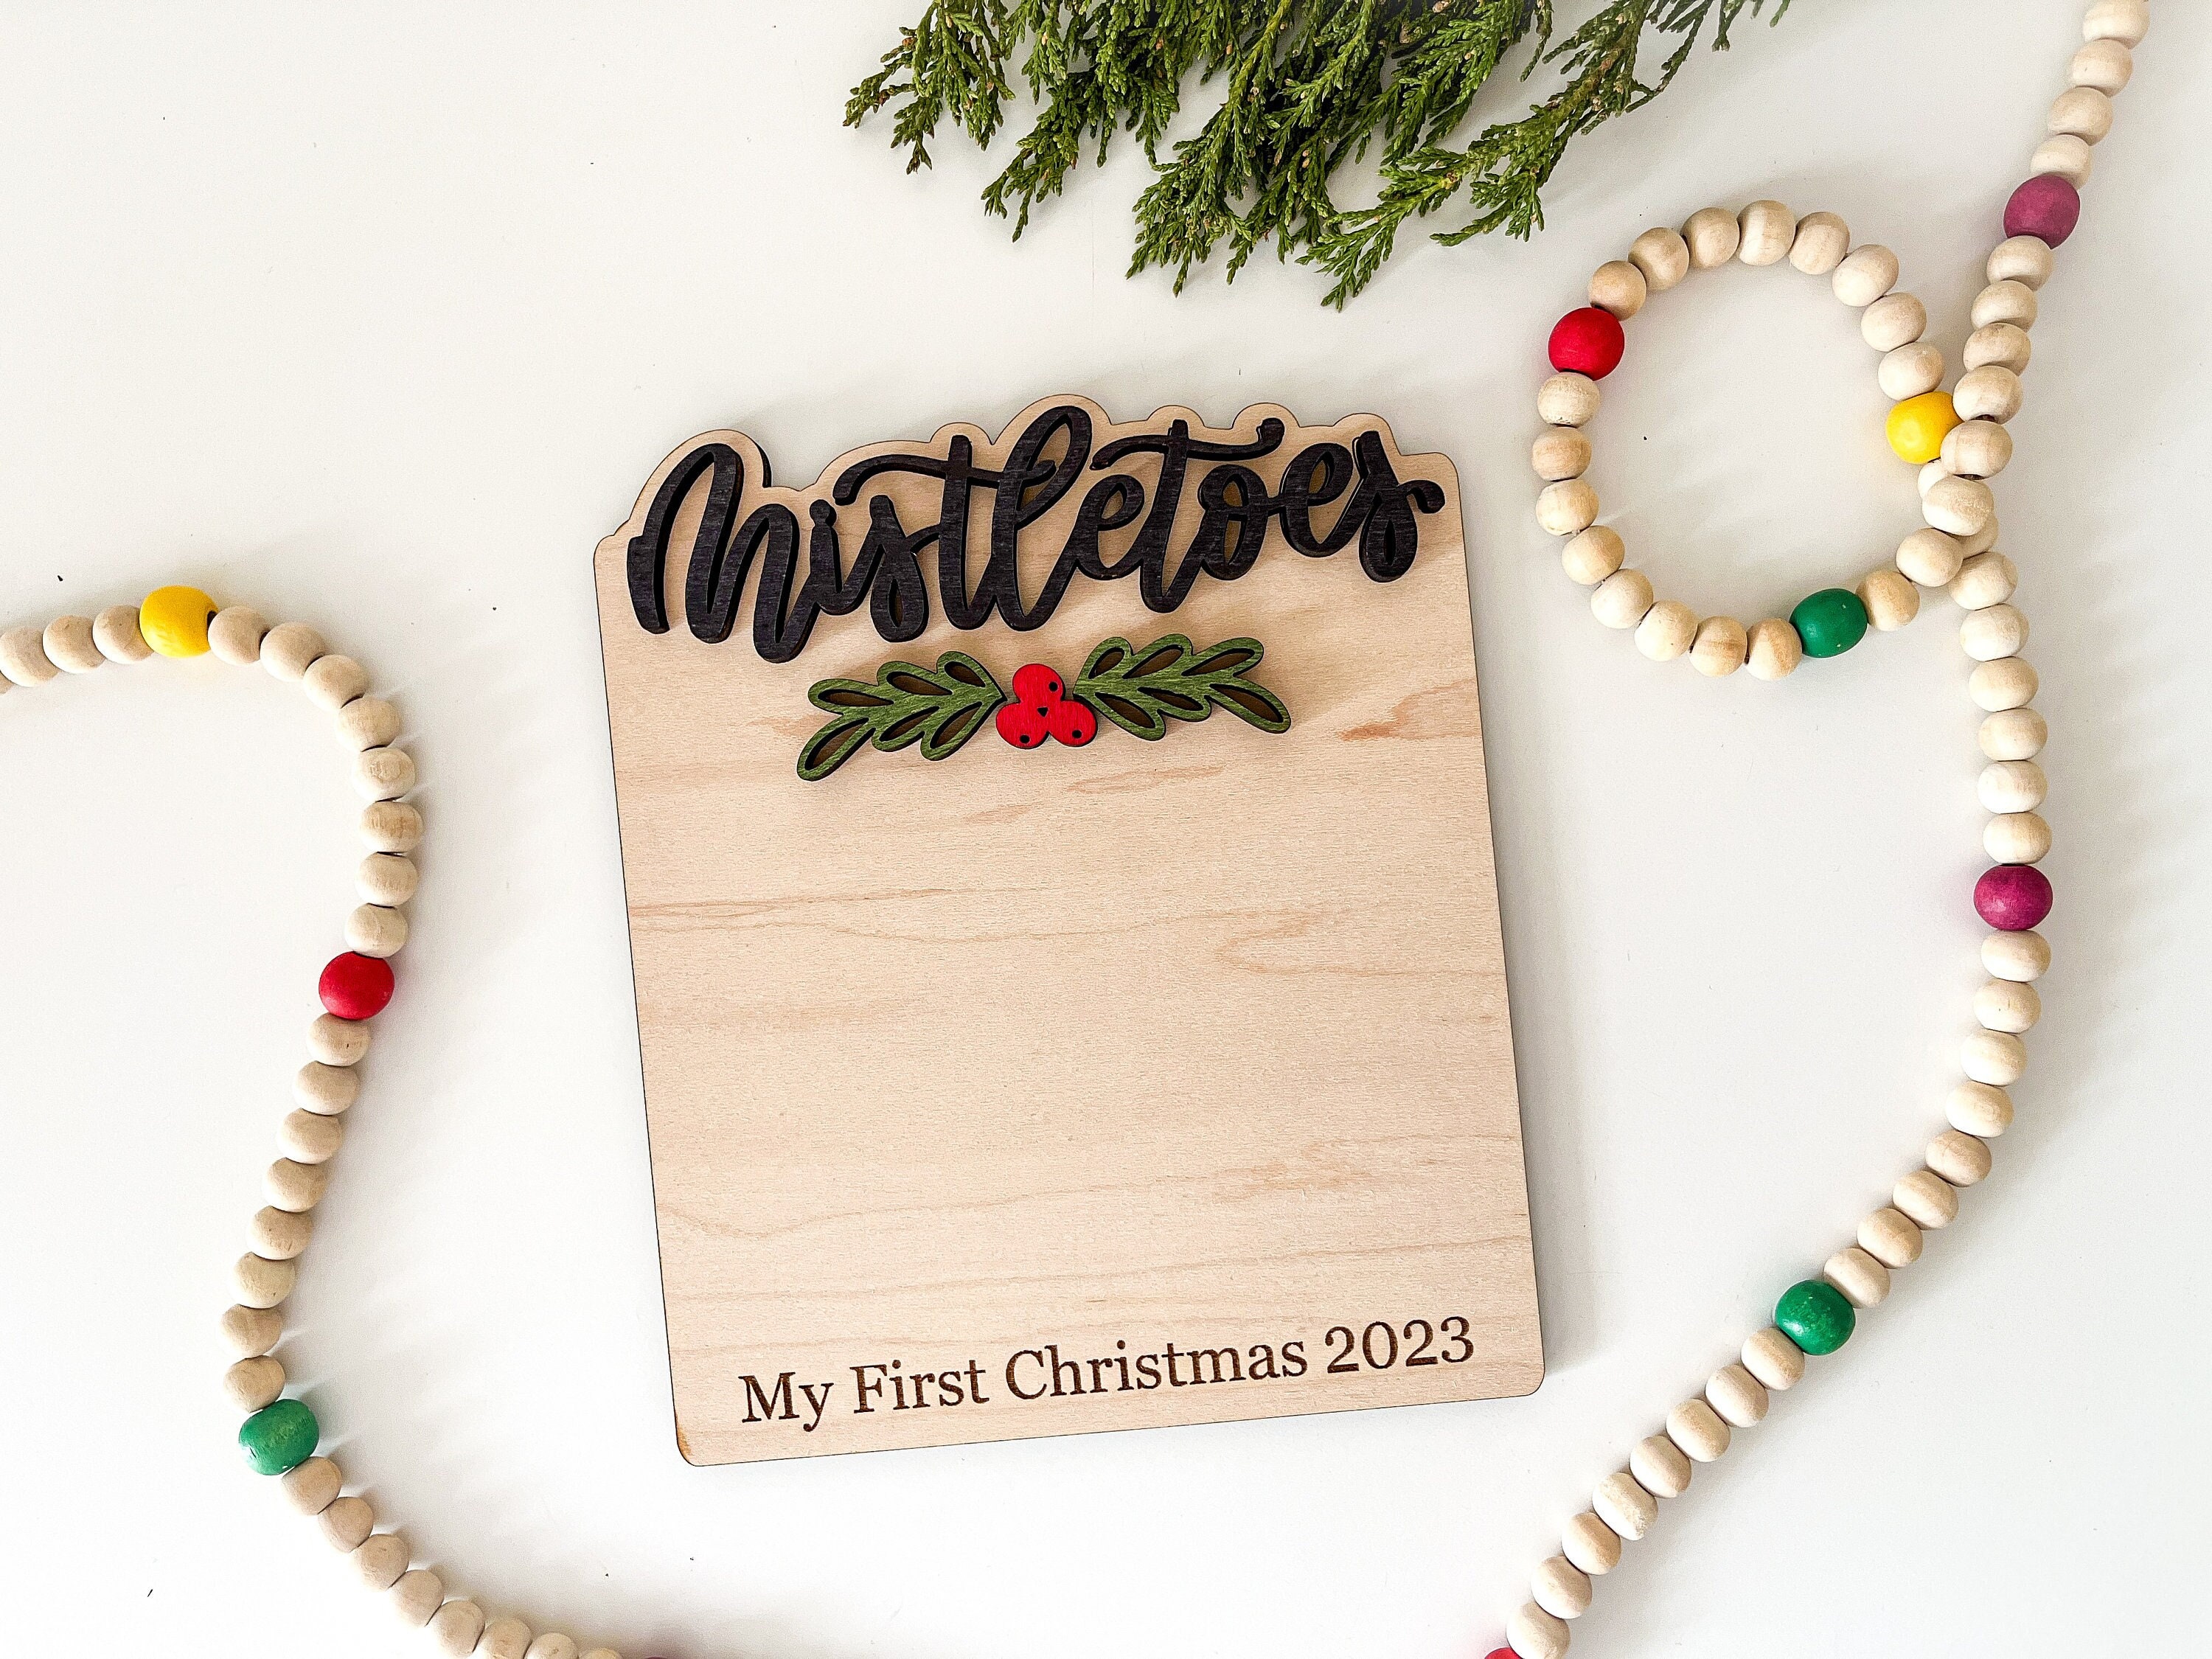 Minimalist Christmas Sprigs and Berries Seamless Papers 